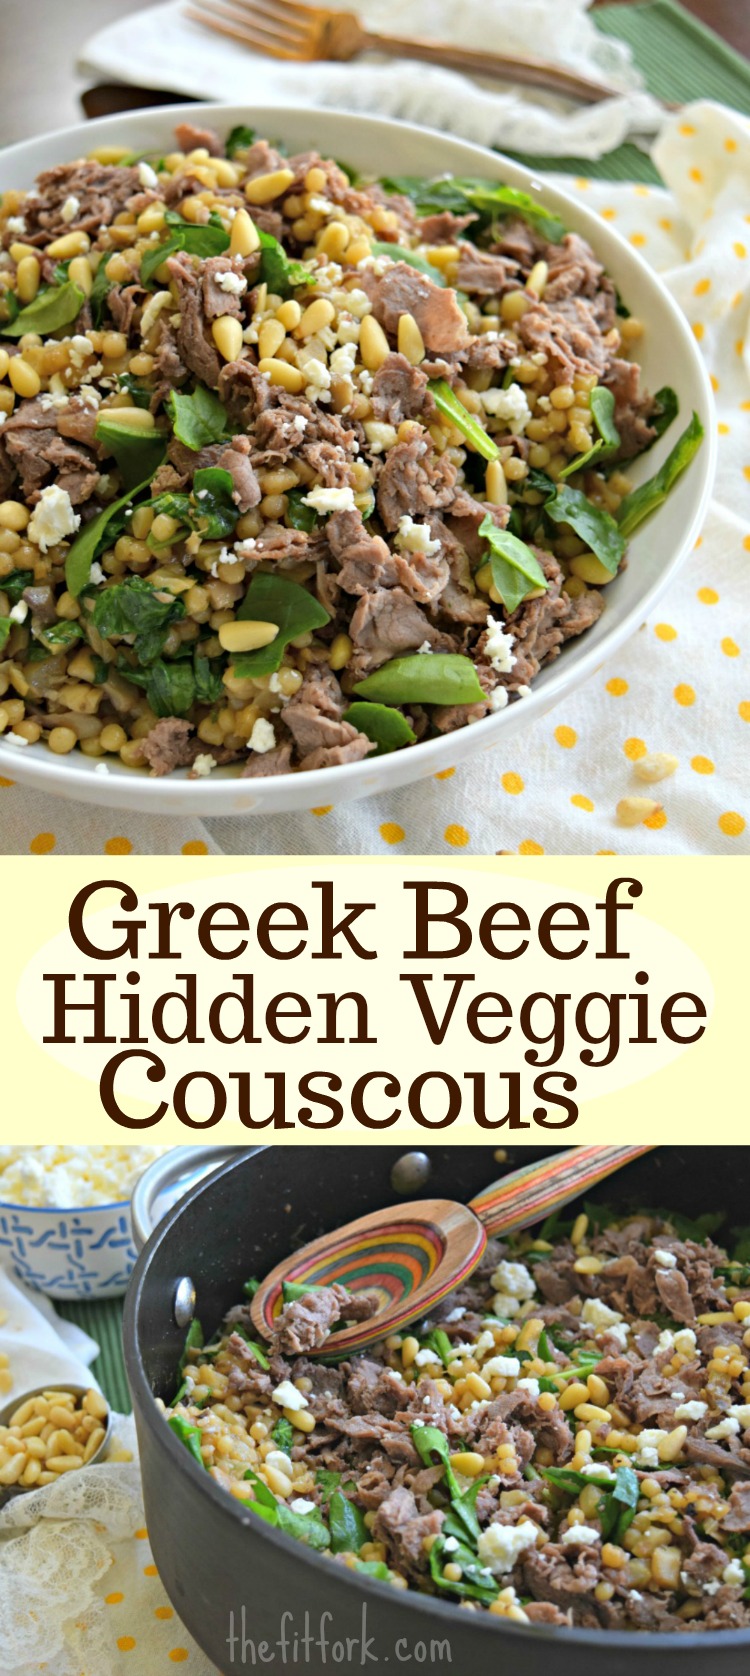 Greek Beef Hidden Veggie Couscous -- is a super easy, quick, one-skillet meal that your family will love! While the spinach is visible, there are more than 4 cups of other hidden vegetables in the dish! Only 311 calories per serving and under 10g fat per serving too! 